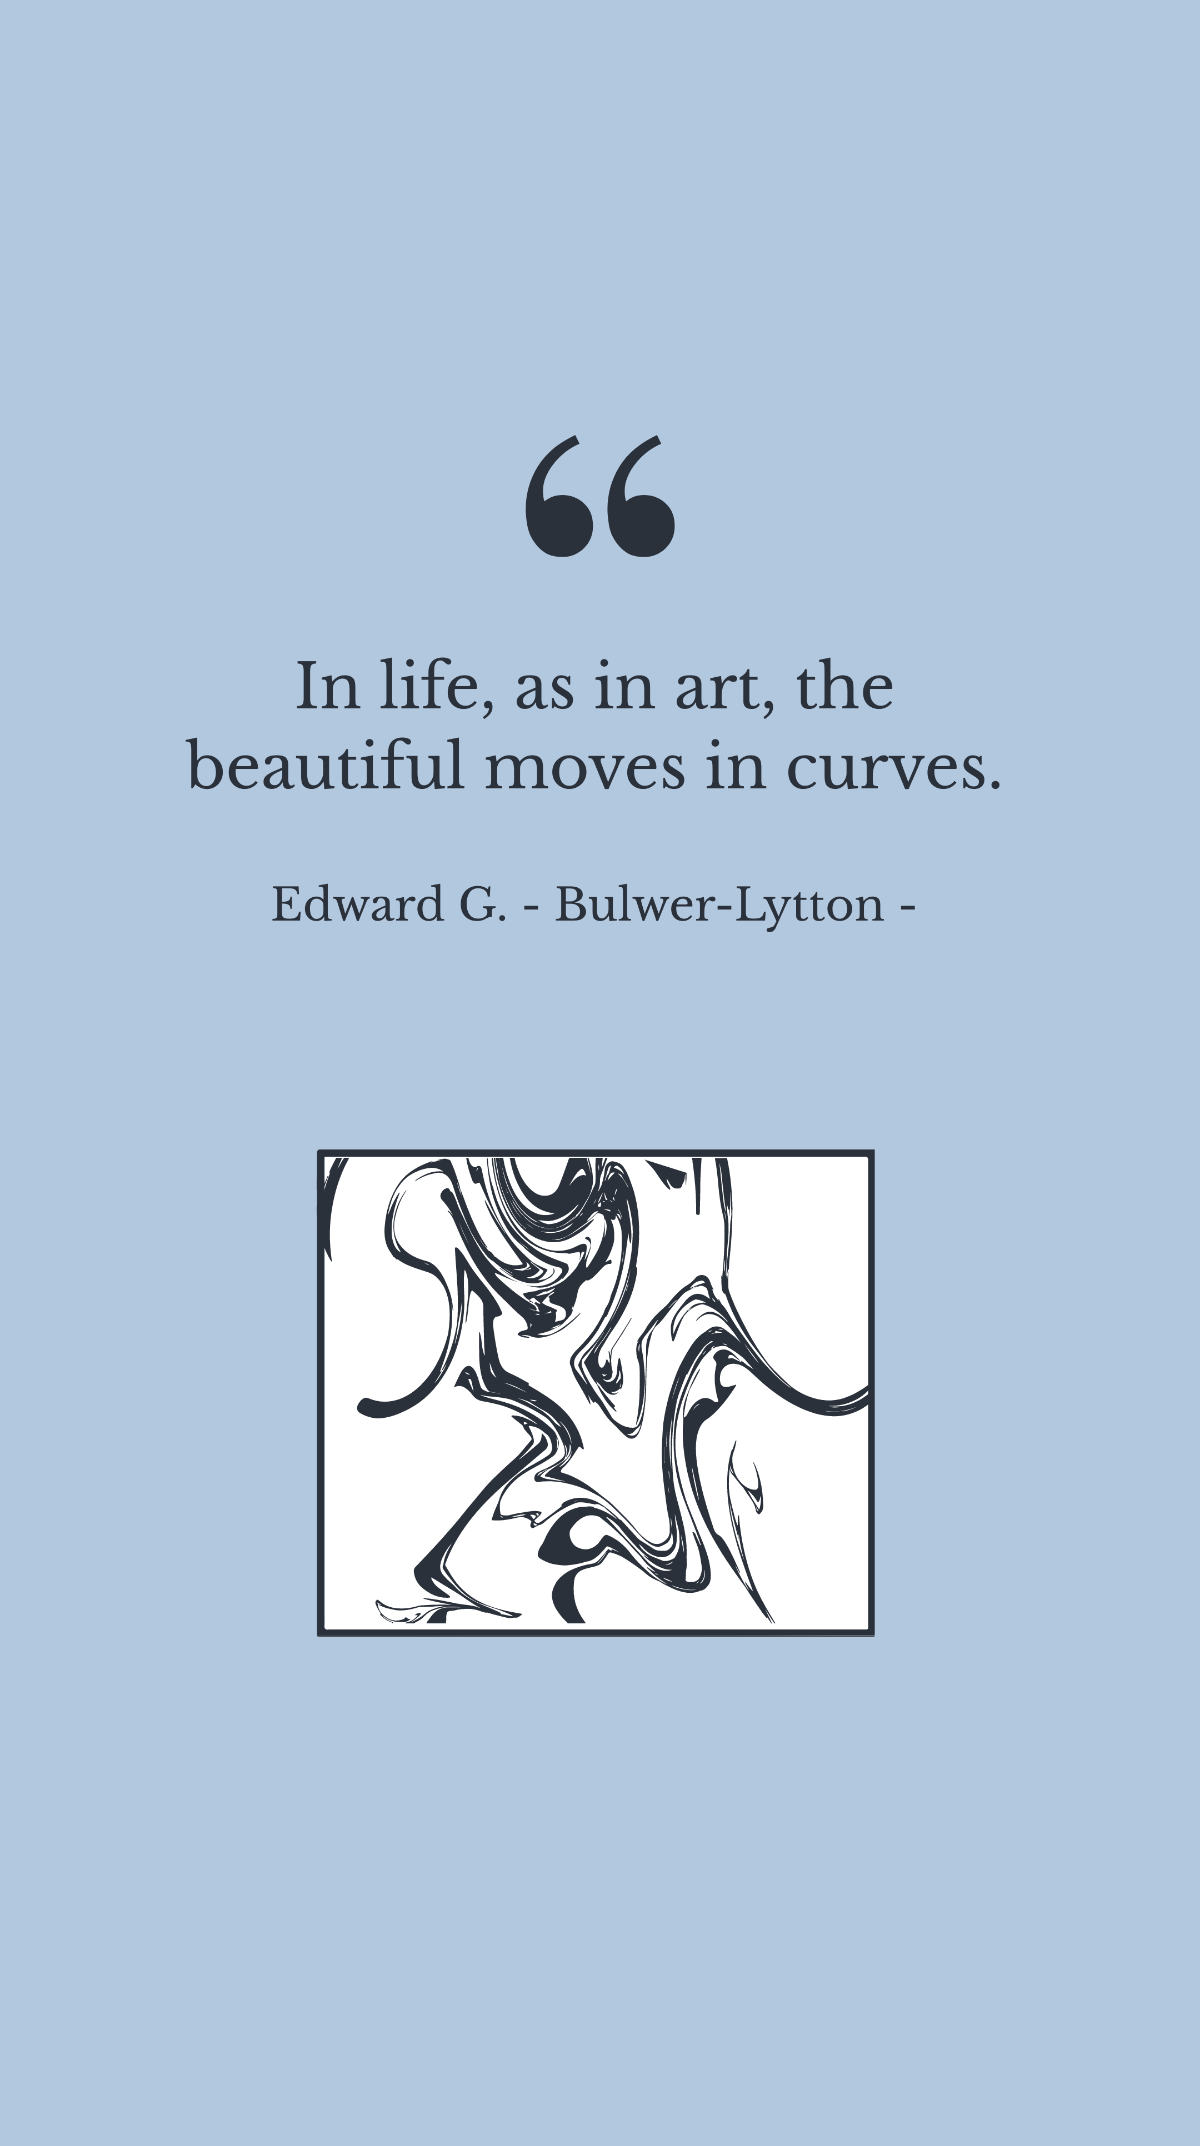 Free Edward G. - Bulwer-Lytton - In life, as in art, the beautiful moves in curves. Template